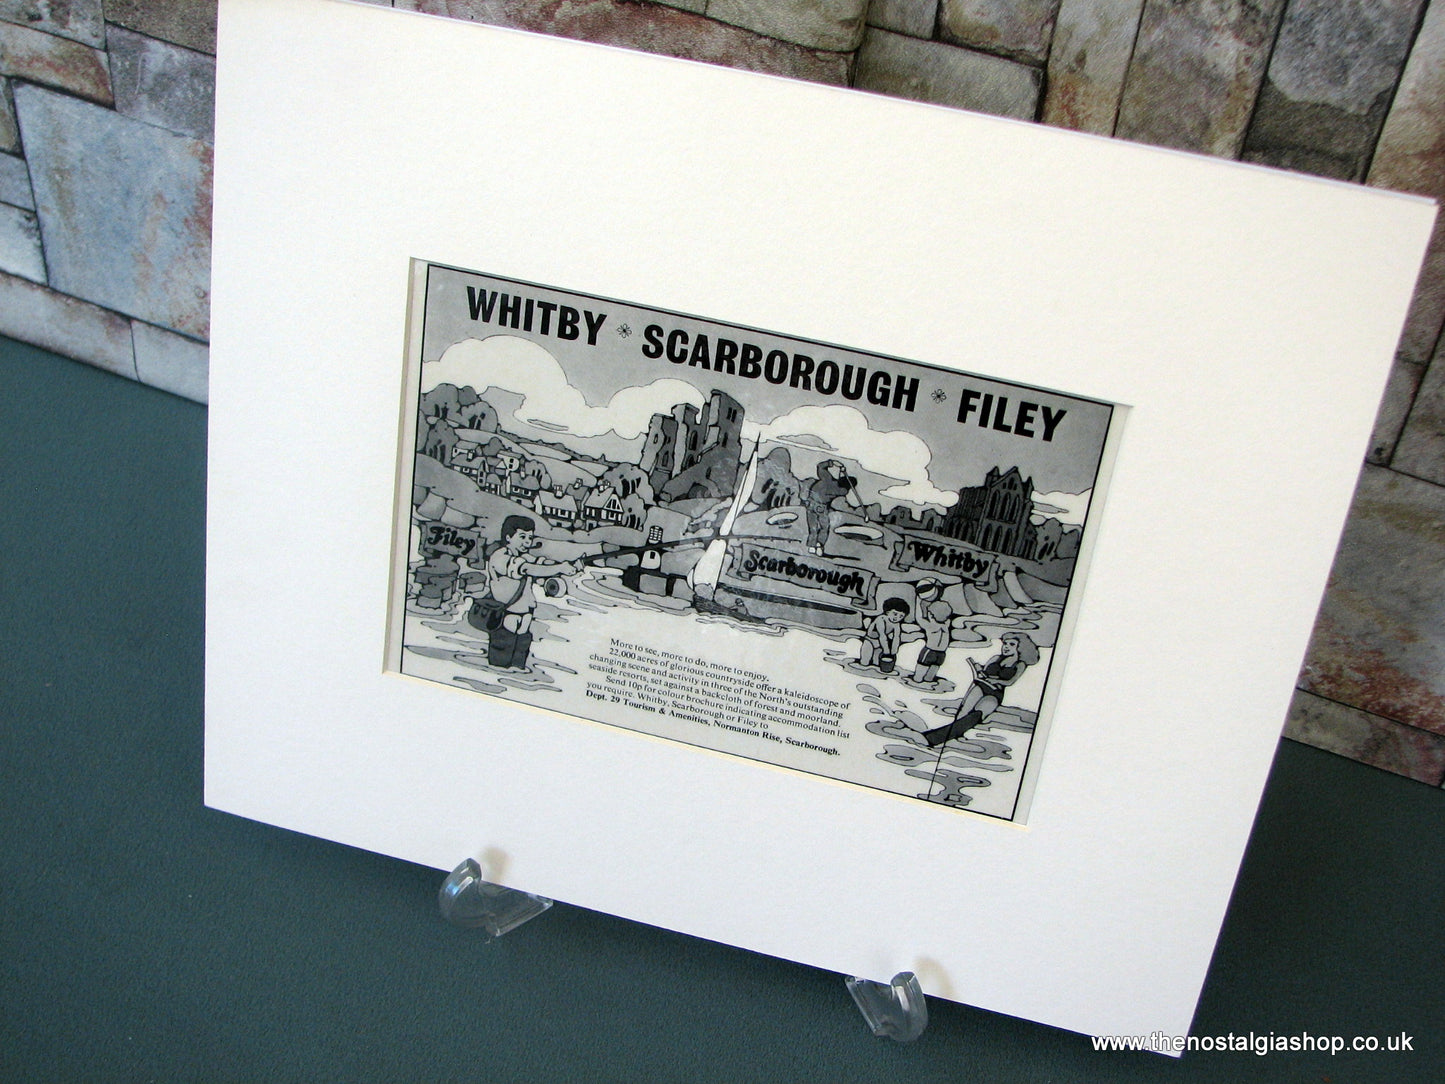 Whitby, Scarborough, Filey. 1975 Original Holiday Advert (M103)